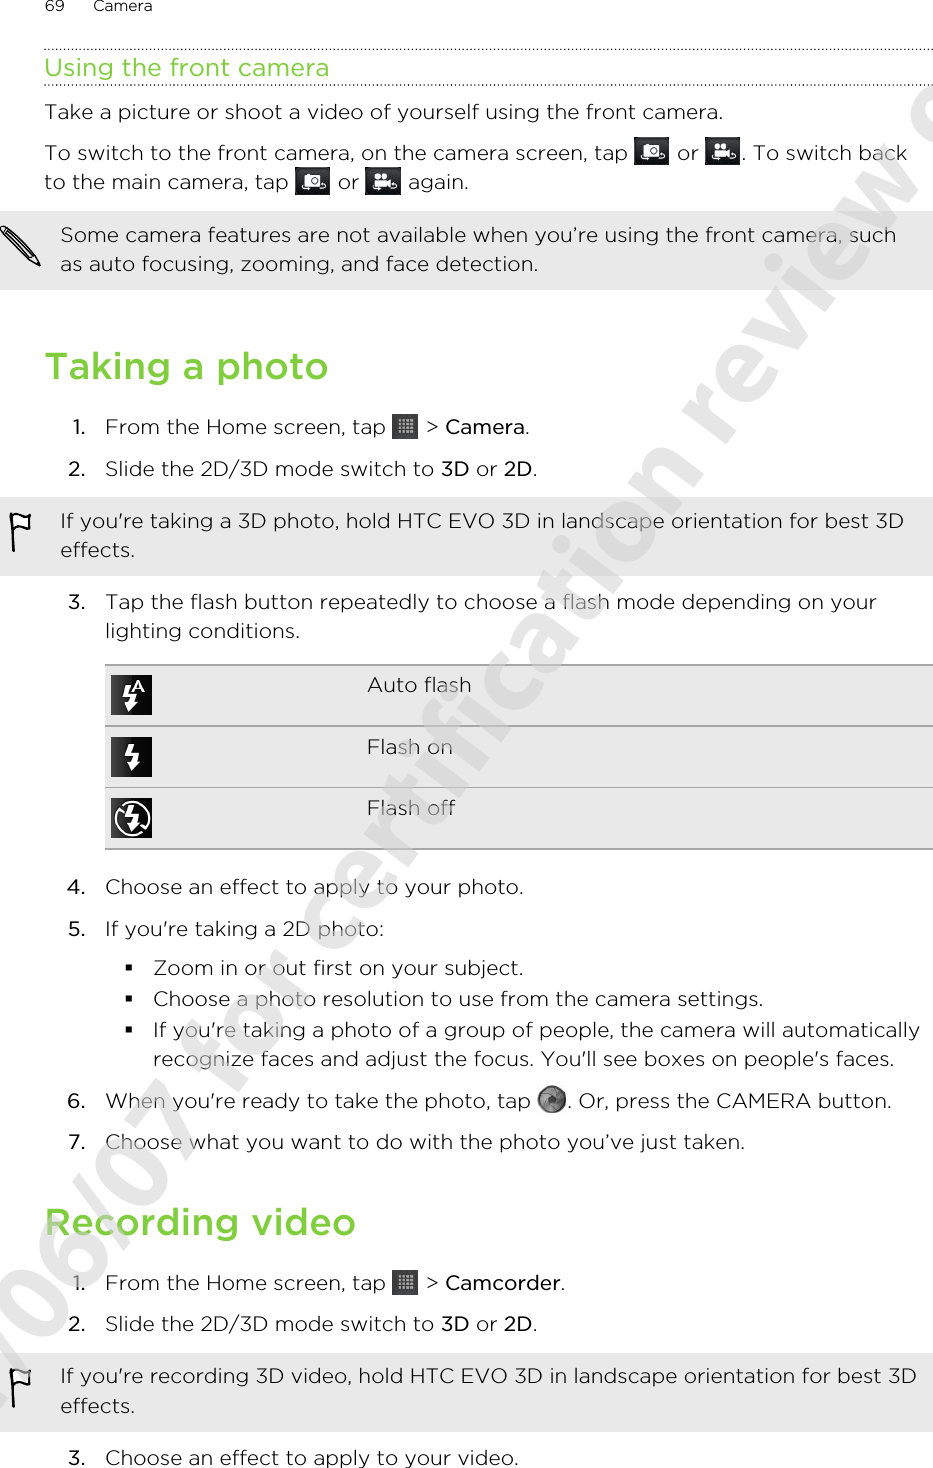 Using the front cameraTake a picture or shoot a video of yourself using the front camera.To switch to the front camera, on the camera screen, tap   or  . To switch backto the main camera, tap   or   again.Some camera features are not available when you’re using the front camera, suchas auto focusing, zooming, and face detection.Taking a photo1. From the Home screen, tap   &gt; Camera.2. Slide the 2D/3D mode switch to 3D or 2D. If you&apos;re taking a 3D photo, hold HTC EVO 3D in landscape orientation for best 3Deffects.3. Tap the flash button repeatedly to choose a flash mode depending on yourlighting conditions.Auto flashFlash onFlash off4. Choose an effect to apply to your photo.5. If you&apos;re taking a 2D photo:§Zoom in or out first on your subject.§Choose a photo resolution to use from the camera settings.§If you&apos;re taking a photo of a group of people, the camera will automaticallyrecognize faces and adjust the focus. You&apos;ll see boxes on people&apos;s faces.6. When you&apos;re ready to take the photo, tap  . Or, press the CAMERA button.7. Choose what you want to do with the photo you’ve just taken.Recording video1. From the Home screen, tap   &gt; Camcorder.2. Slide the 2D/3D mode switch to 3D or 2D. If you&apos;re recording 3D video, hold HTC EVO 3D in landscape orientation for best 3Deffects.3. Choose an effect to apply to your video.69 Camera2011/06/07 for certification review only